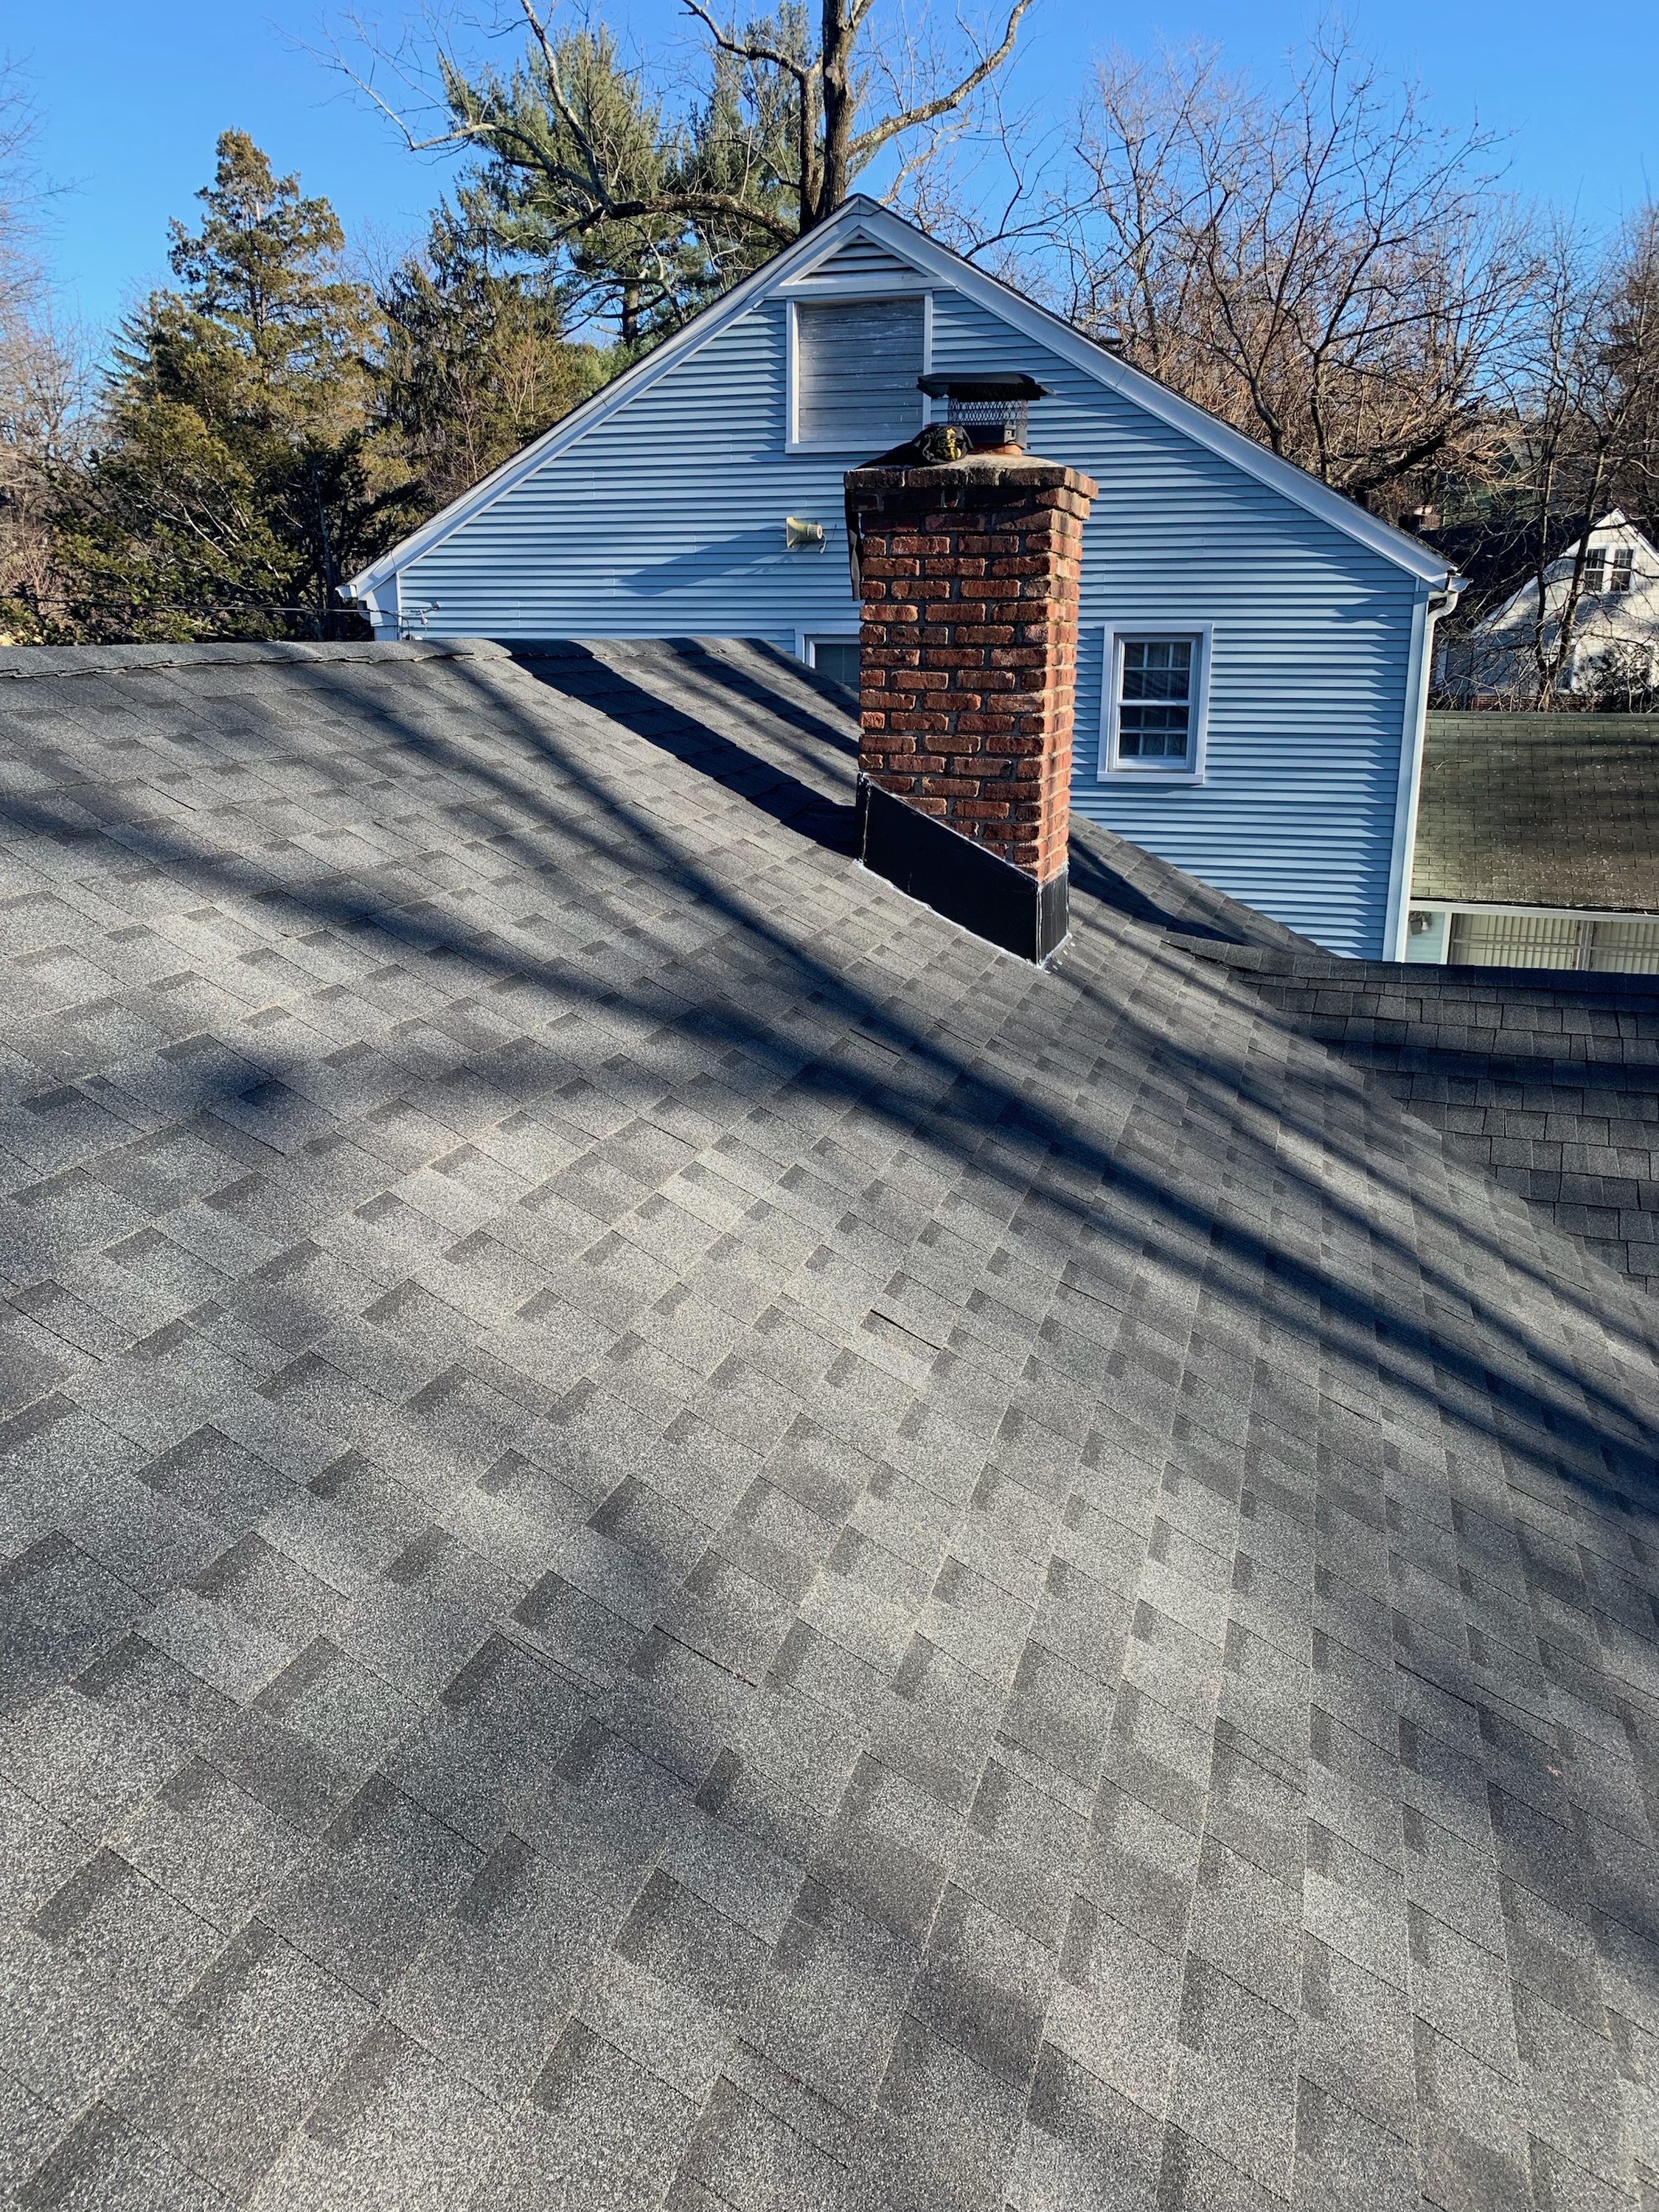 South Orange New Jersey Roof Replacement New Jersey Roofing Maintenance